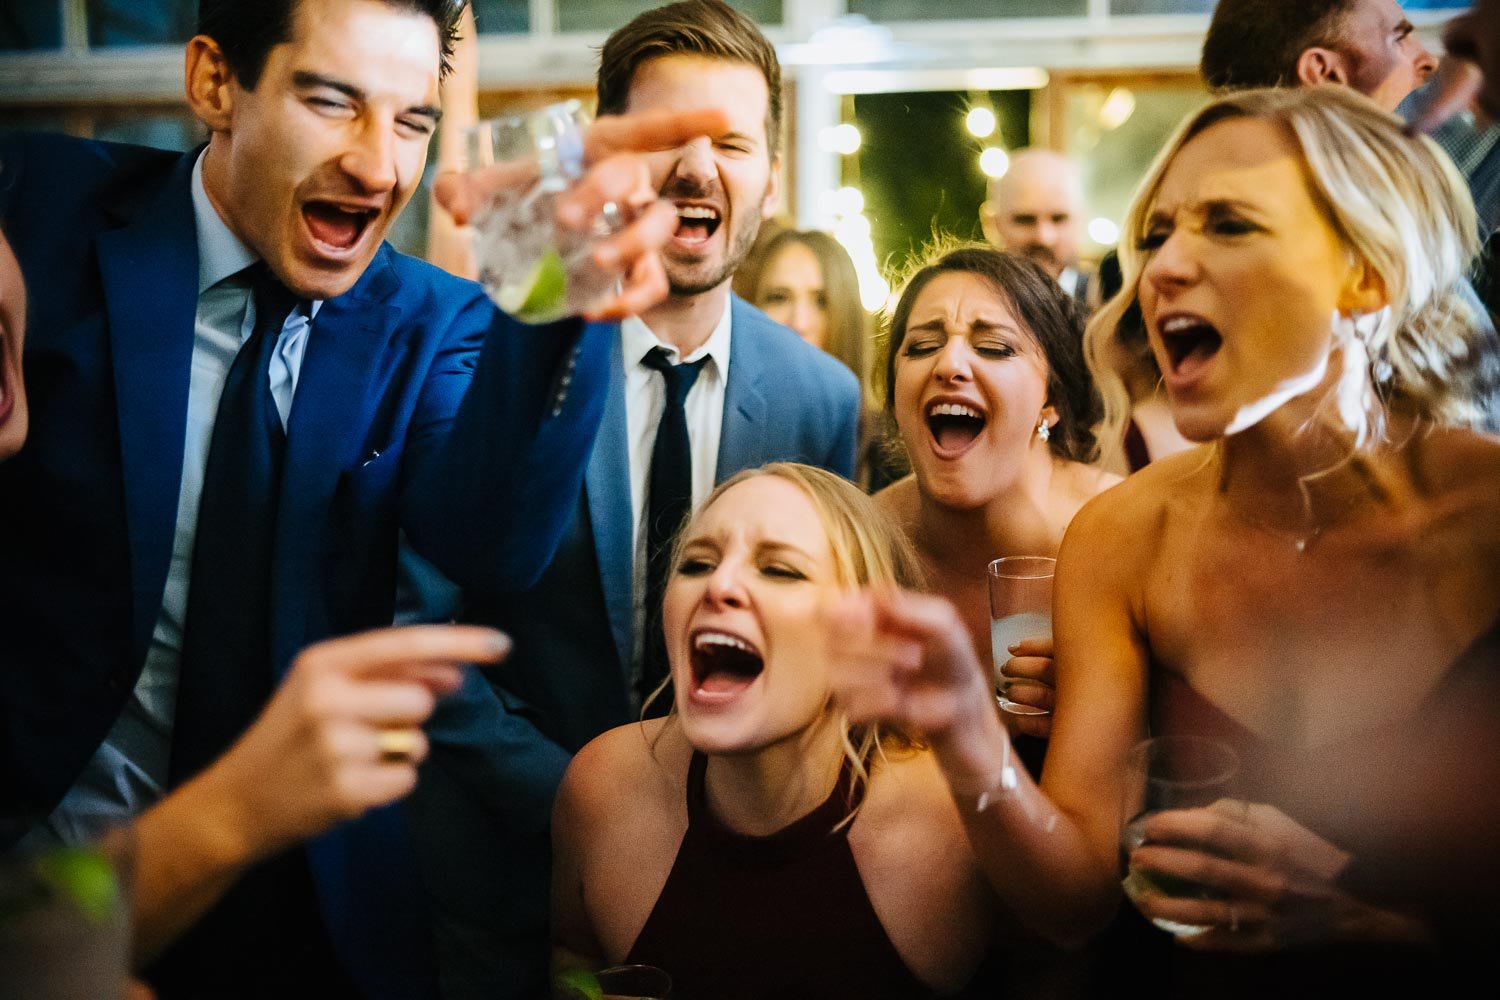 Wedding guests reactions to couple at Barr Mansion wedding reception